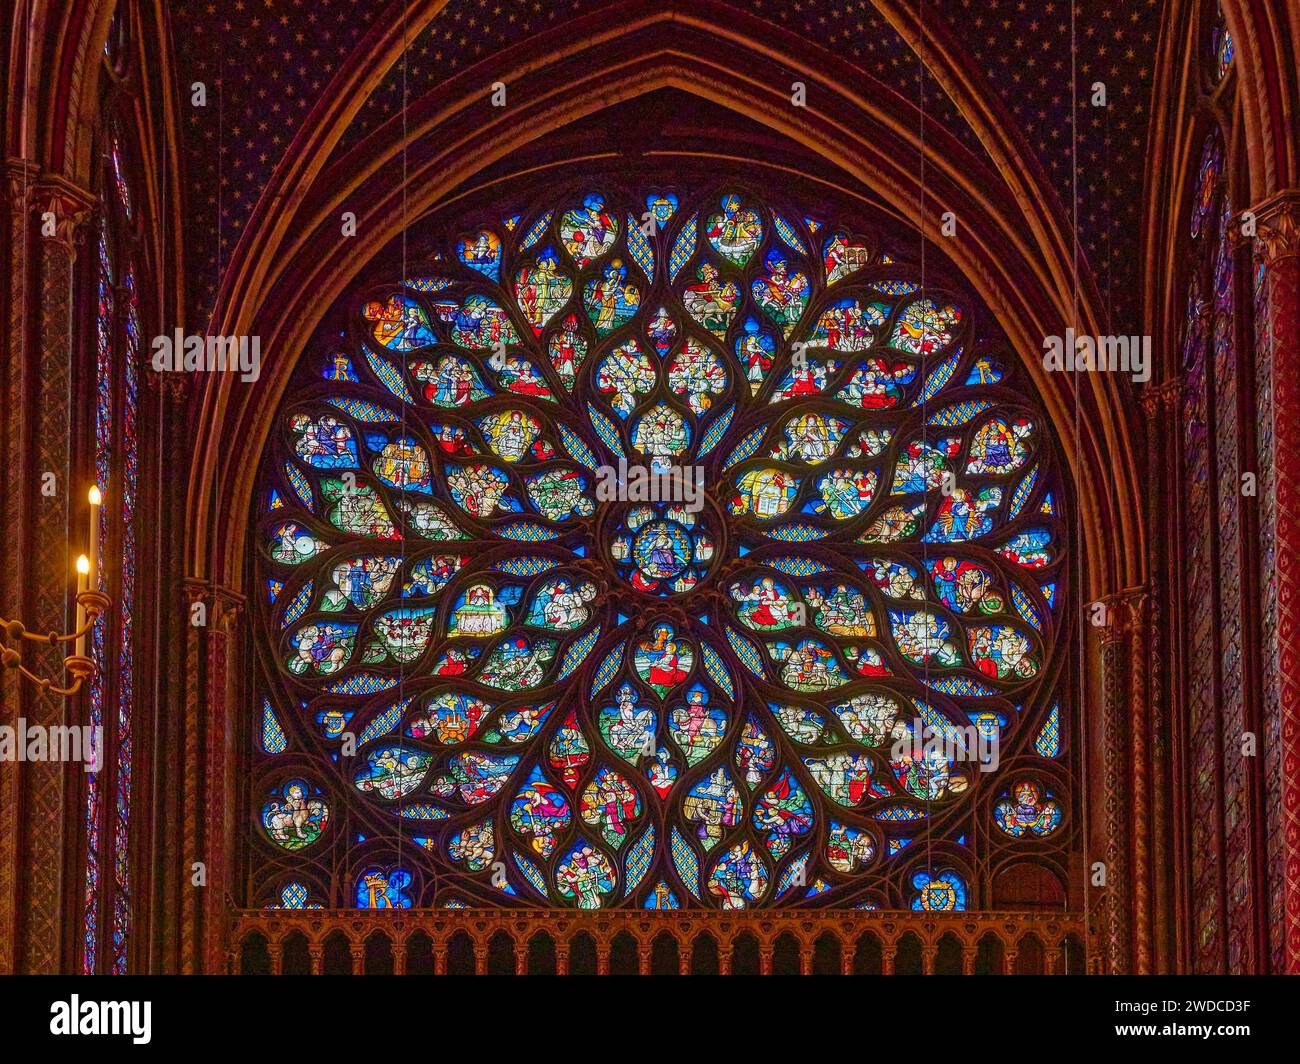 Colourful stained glass window in Gothic style in a church with intricate patterns, Sainte Chapelle. Paris Stock Photo